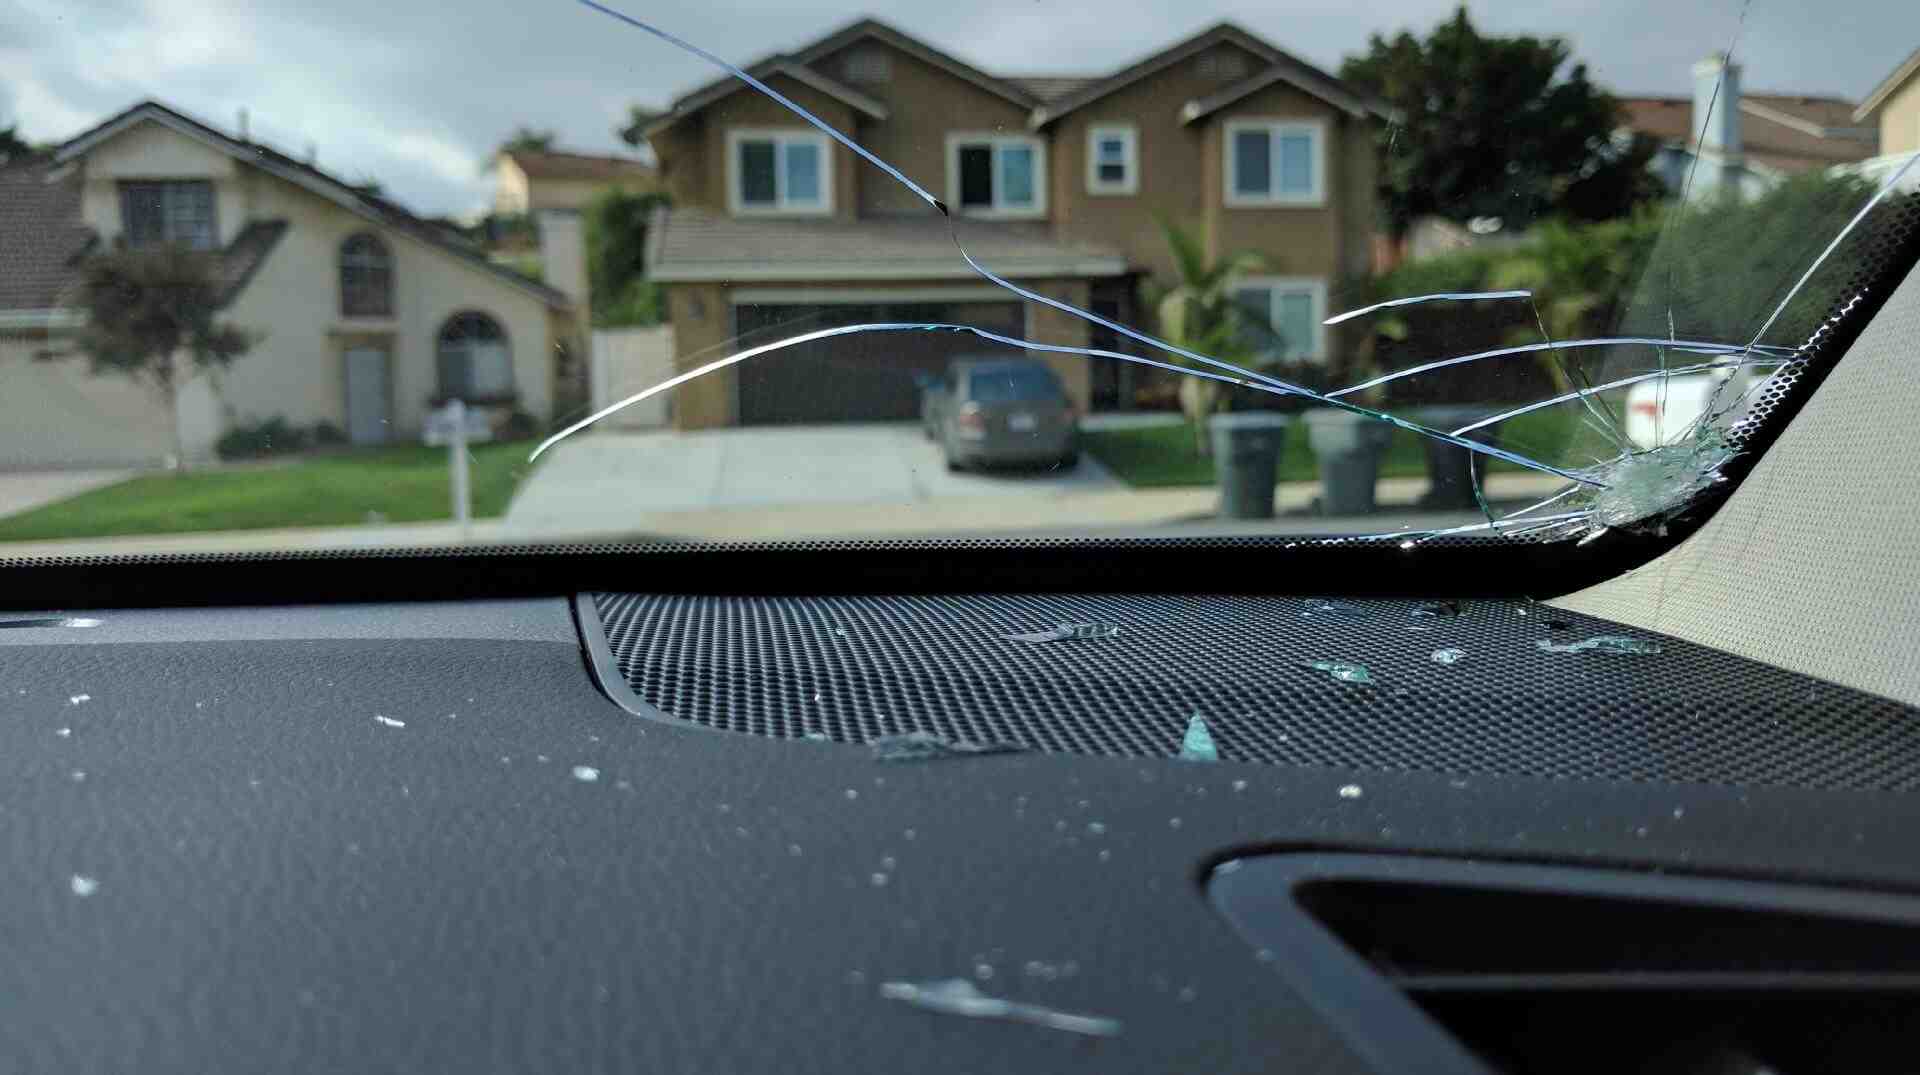 What causes windshield to crack?